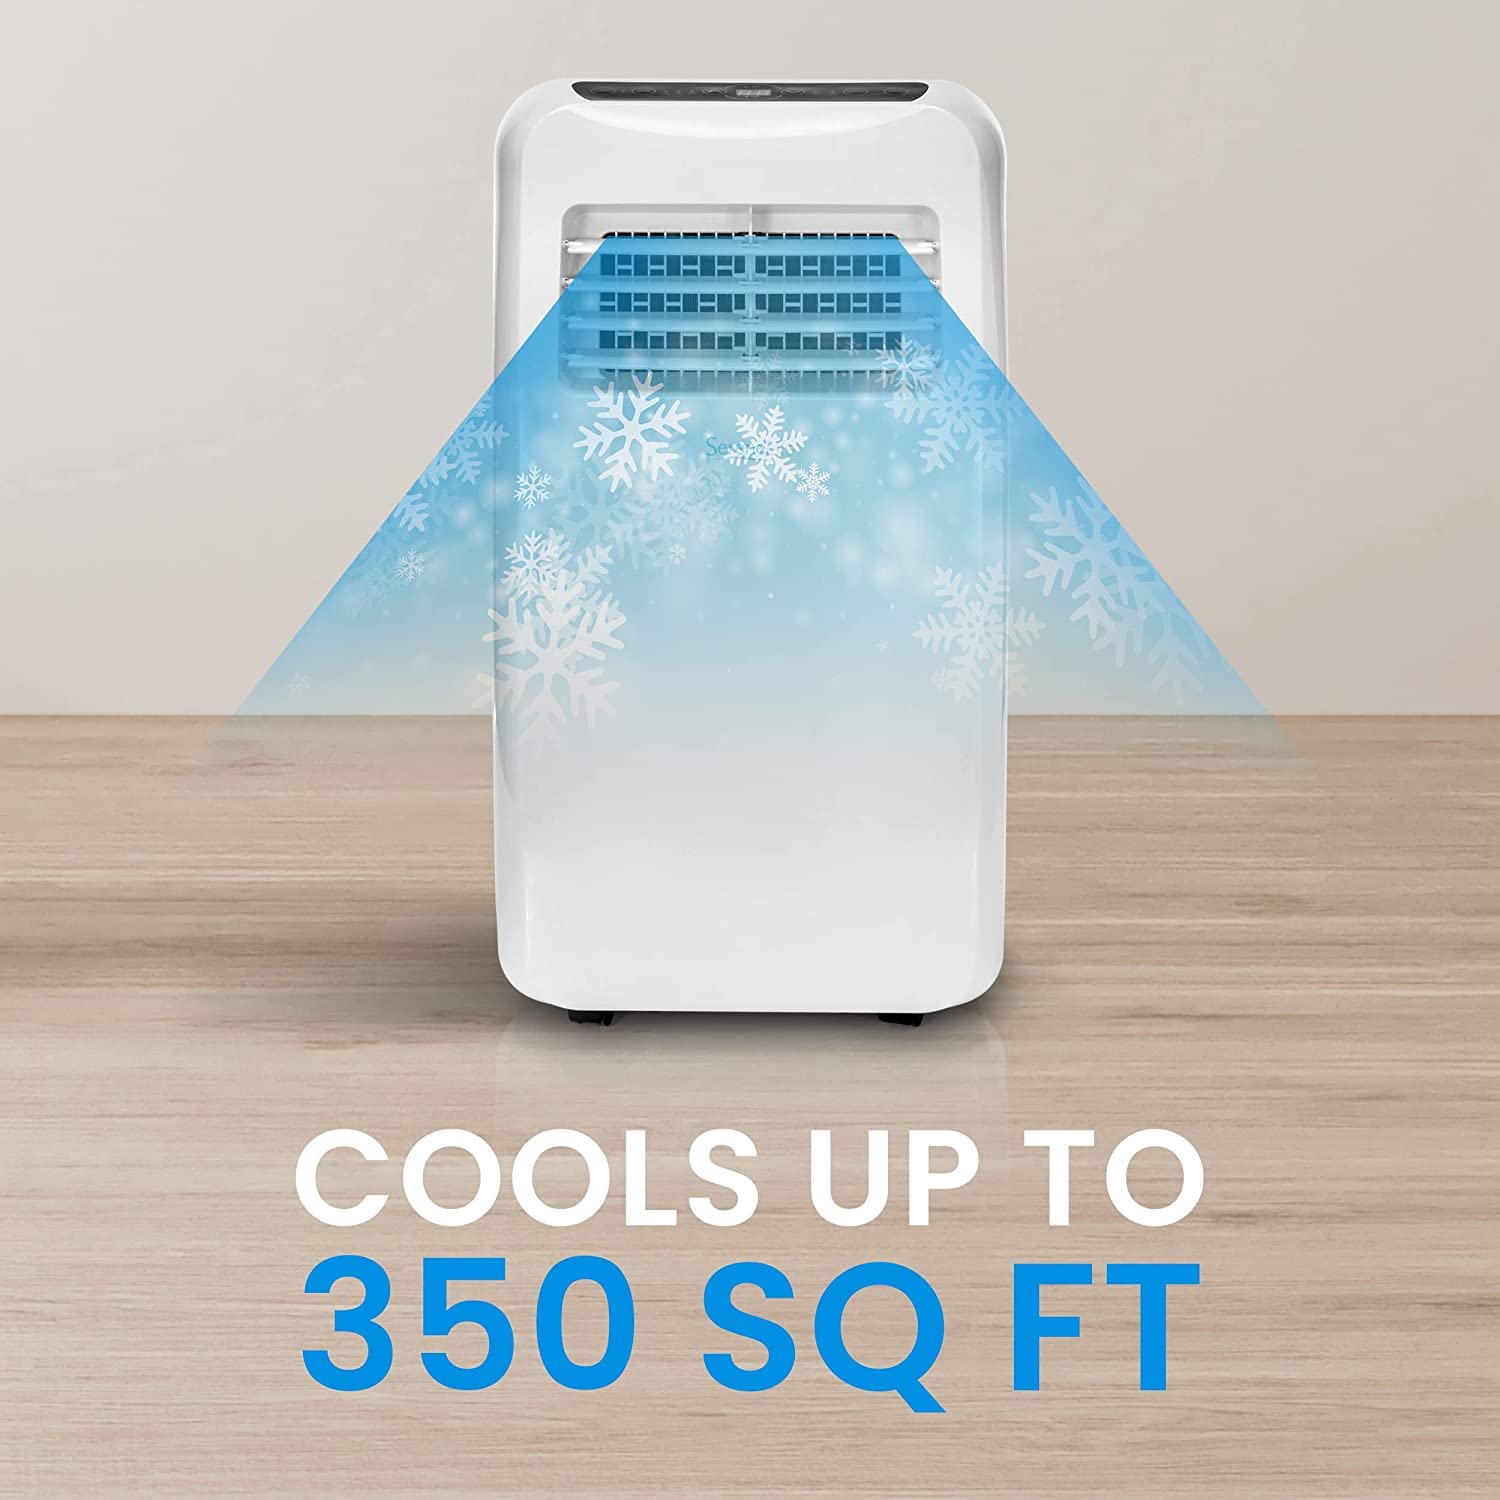 SereneLife SLPAC805W.5 Portable Air Conditioner-Compact Home A/C Cooling Unit with Built-in Dehumidifier & Fan Modes, Includes Window Mount Kit, 8,000 BTU with WiFi + Drain Hose, White